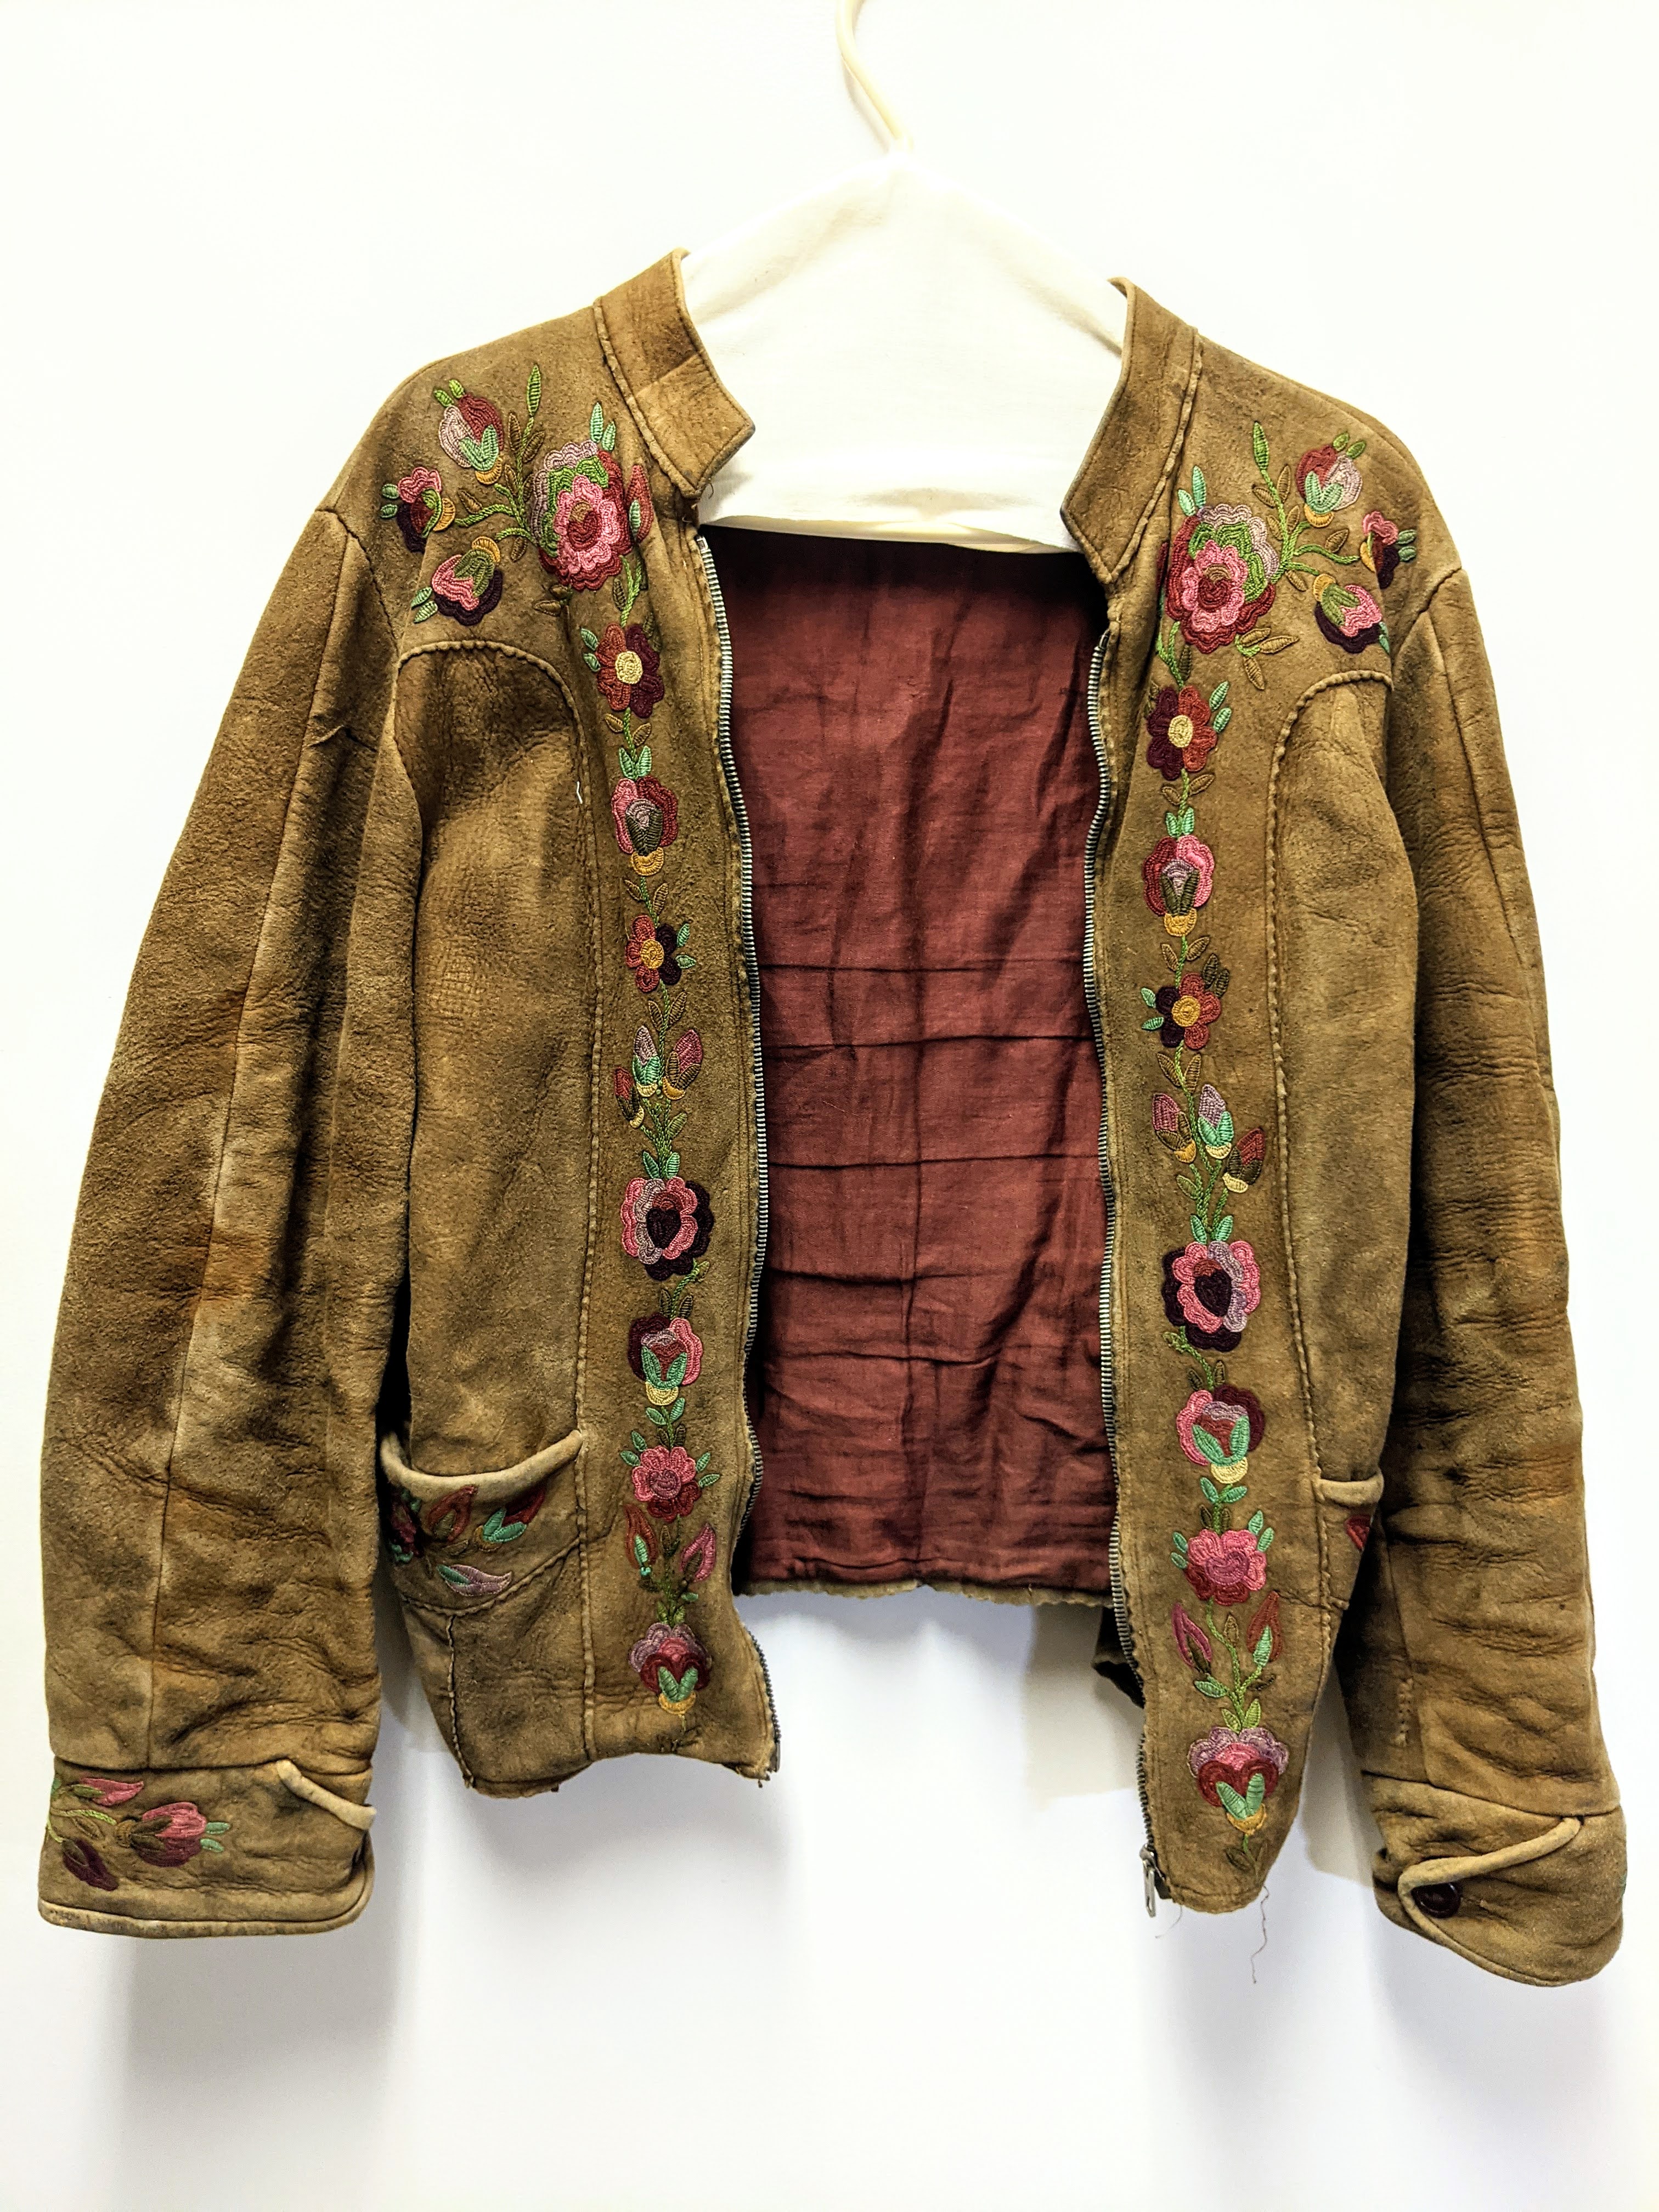 This is a home tanned, beautifully embroidered, moose leather jacket. Likely made by a local in c.1946 it was worn by Pete Clarke for many years - which show in places which are worn out. What has not worn out is the rich smell of home tanned moose hide!
2004.01.01 / Clarke, Pete + Doris
20/02/2023
